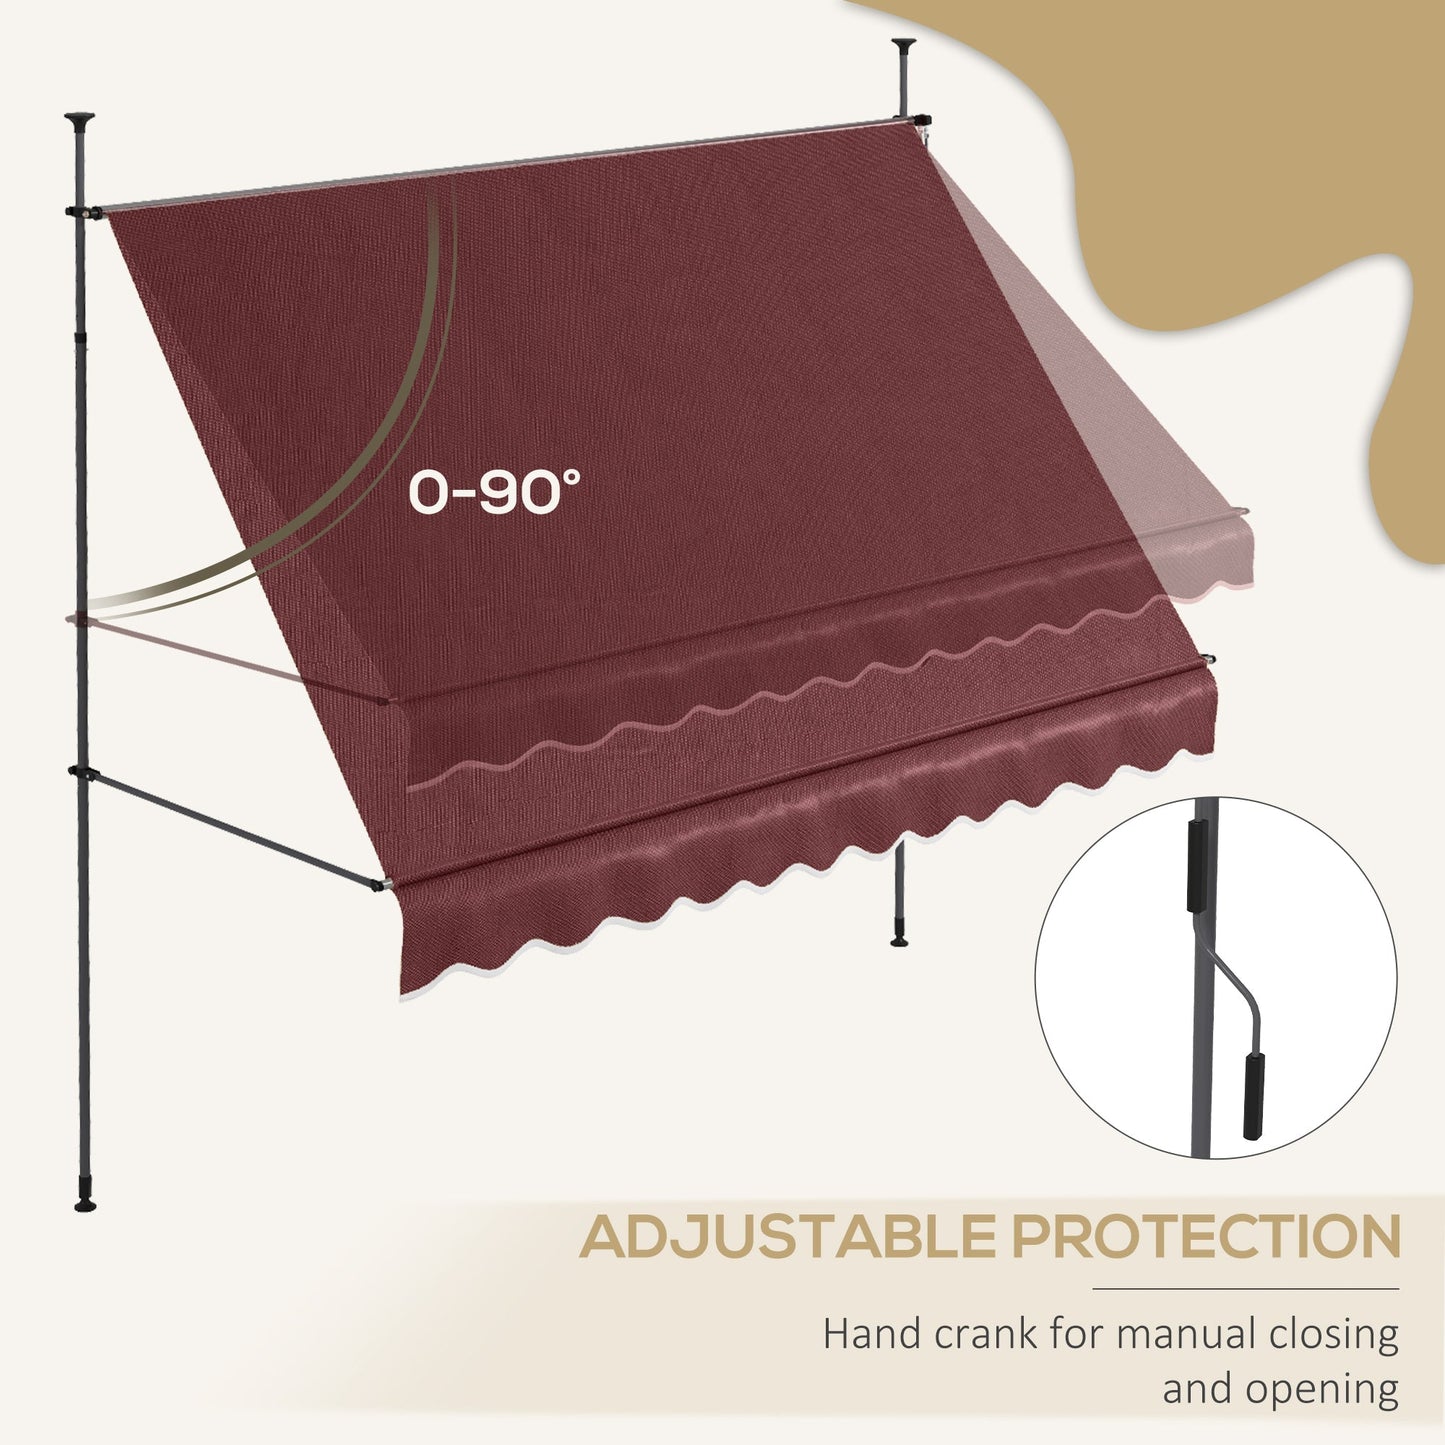 10' x 4' Manual Retractable Awning, Non-Screw Freestanding Patio Awning, UV Resistant, for Window or Door, Wine Red at Gallery Canada